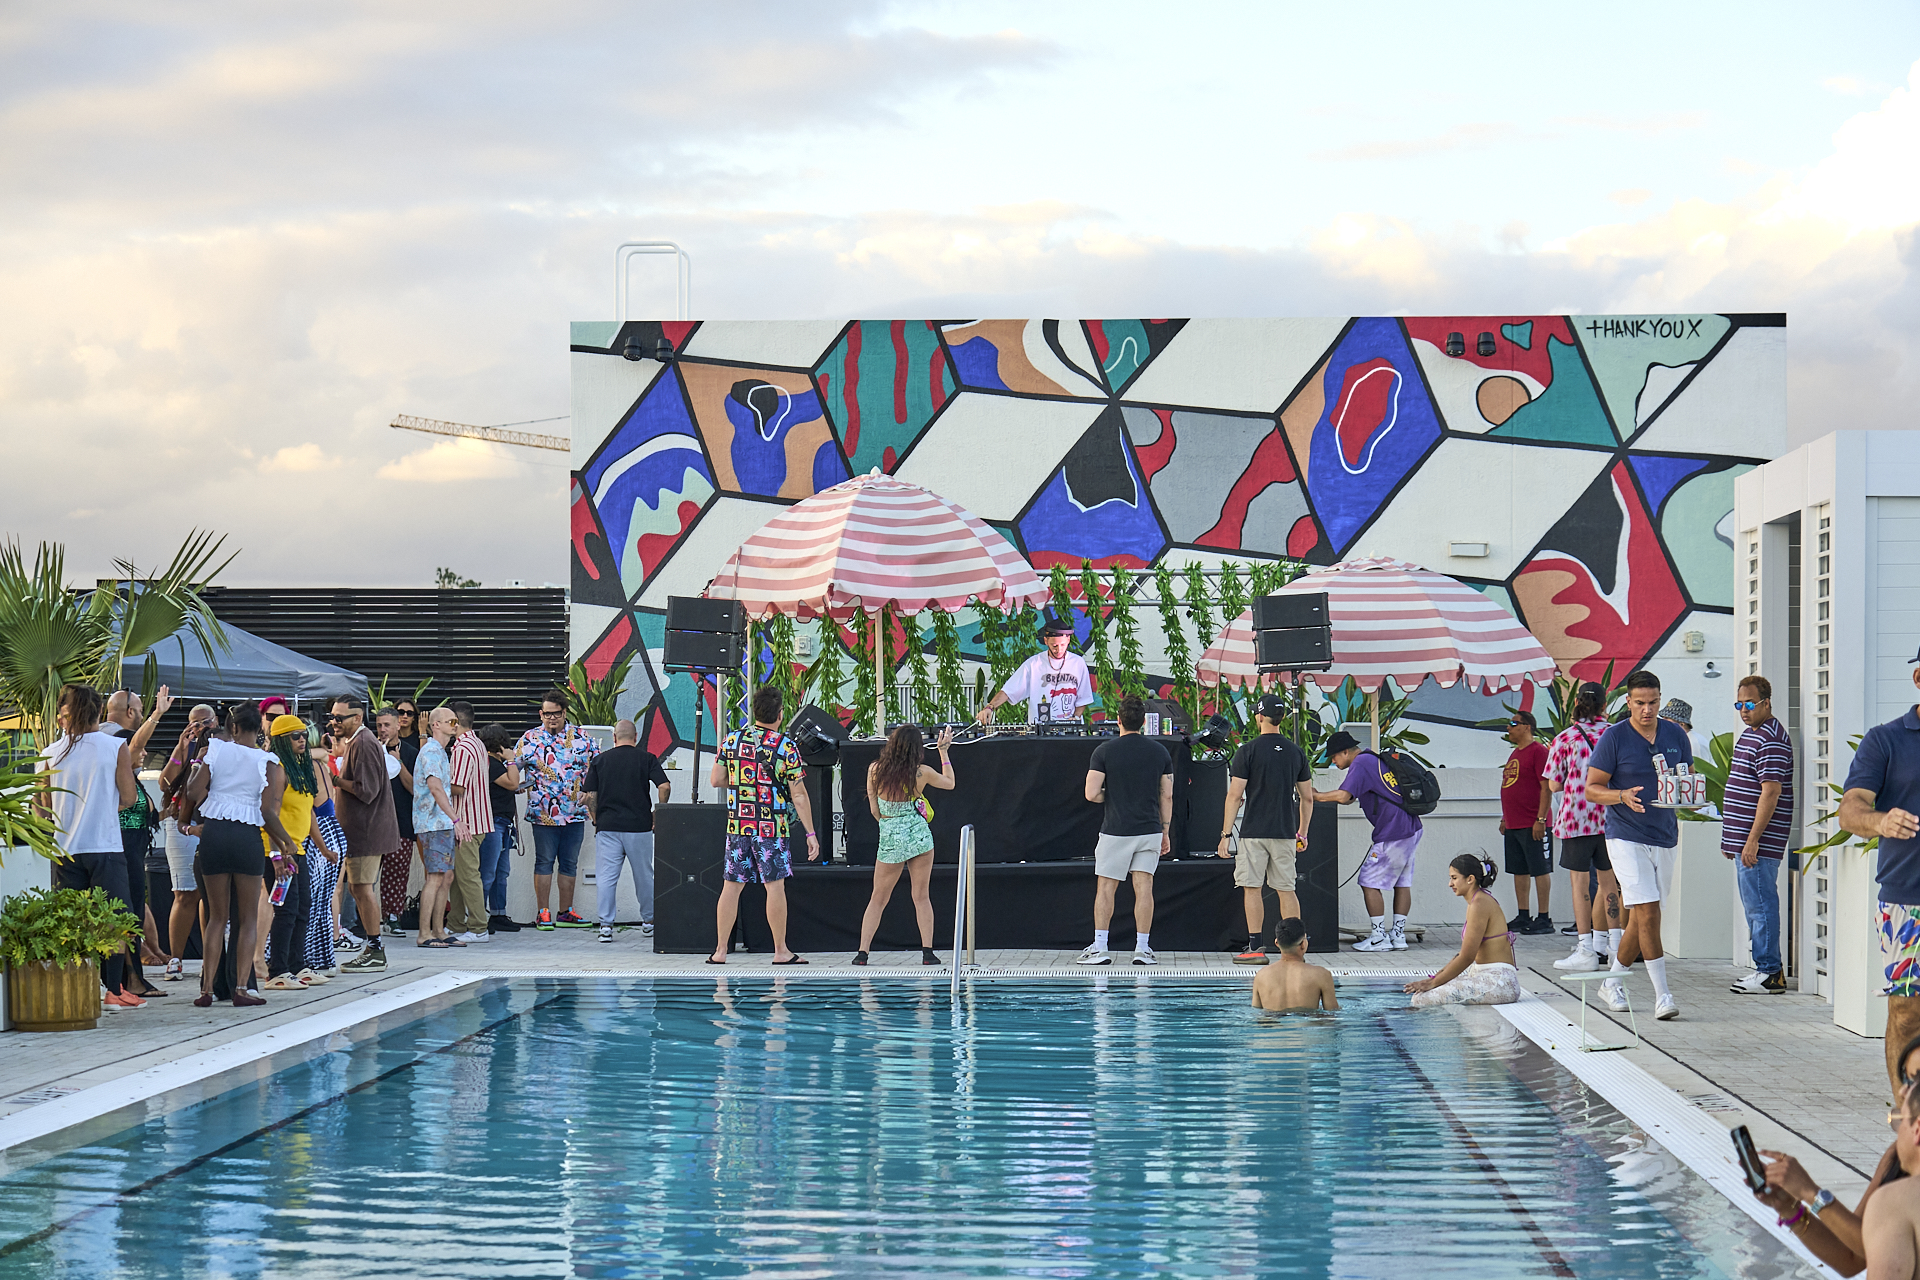 Visit the DND Pool Party at ART Wynwood event page